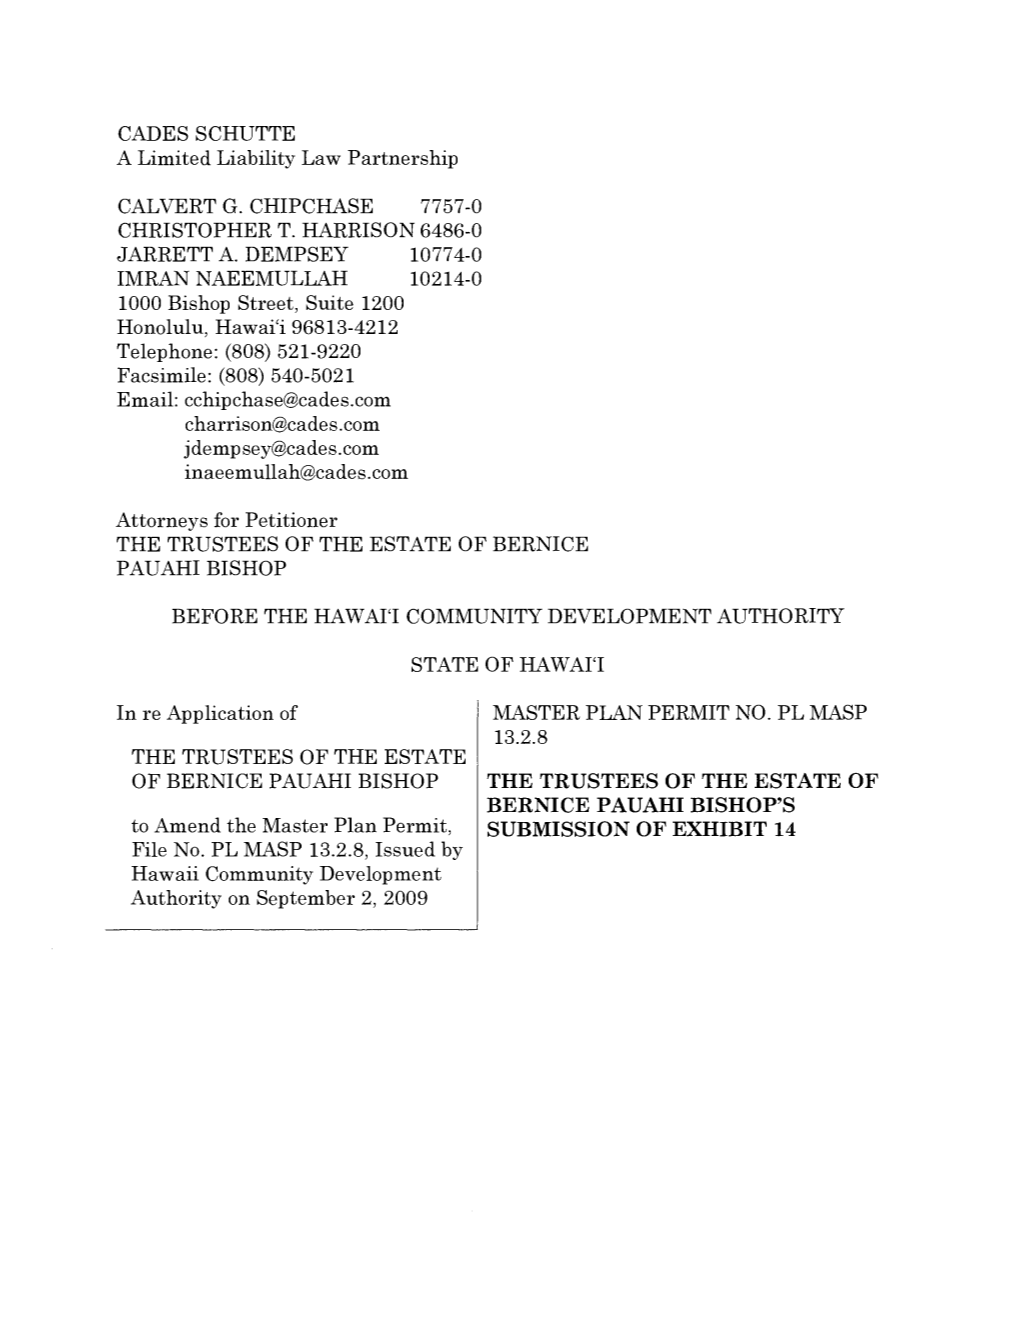 THE TRUSTEES of the ESTATE of BERNICE PAUAHI BISHOP's to Amend the Master Plan Permit, SUBMISSION of EXHIBIT 14 File No